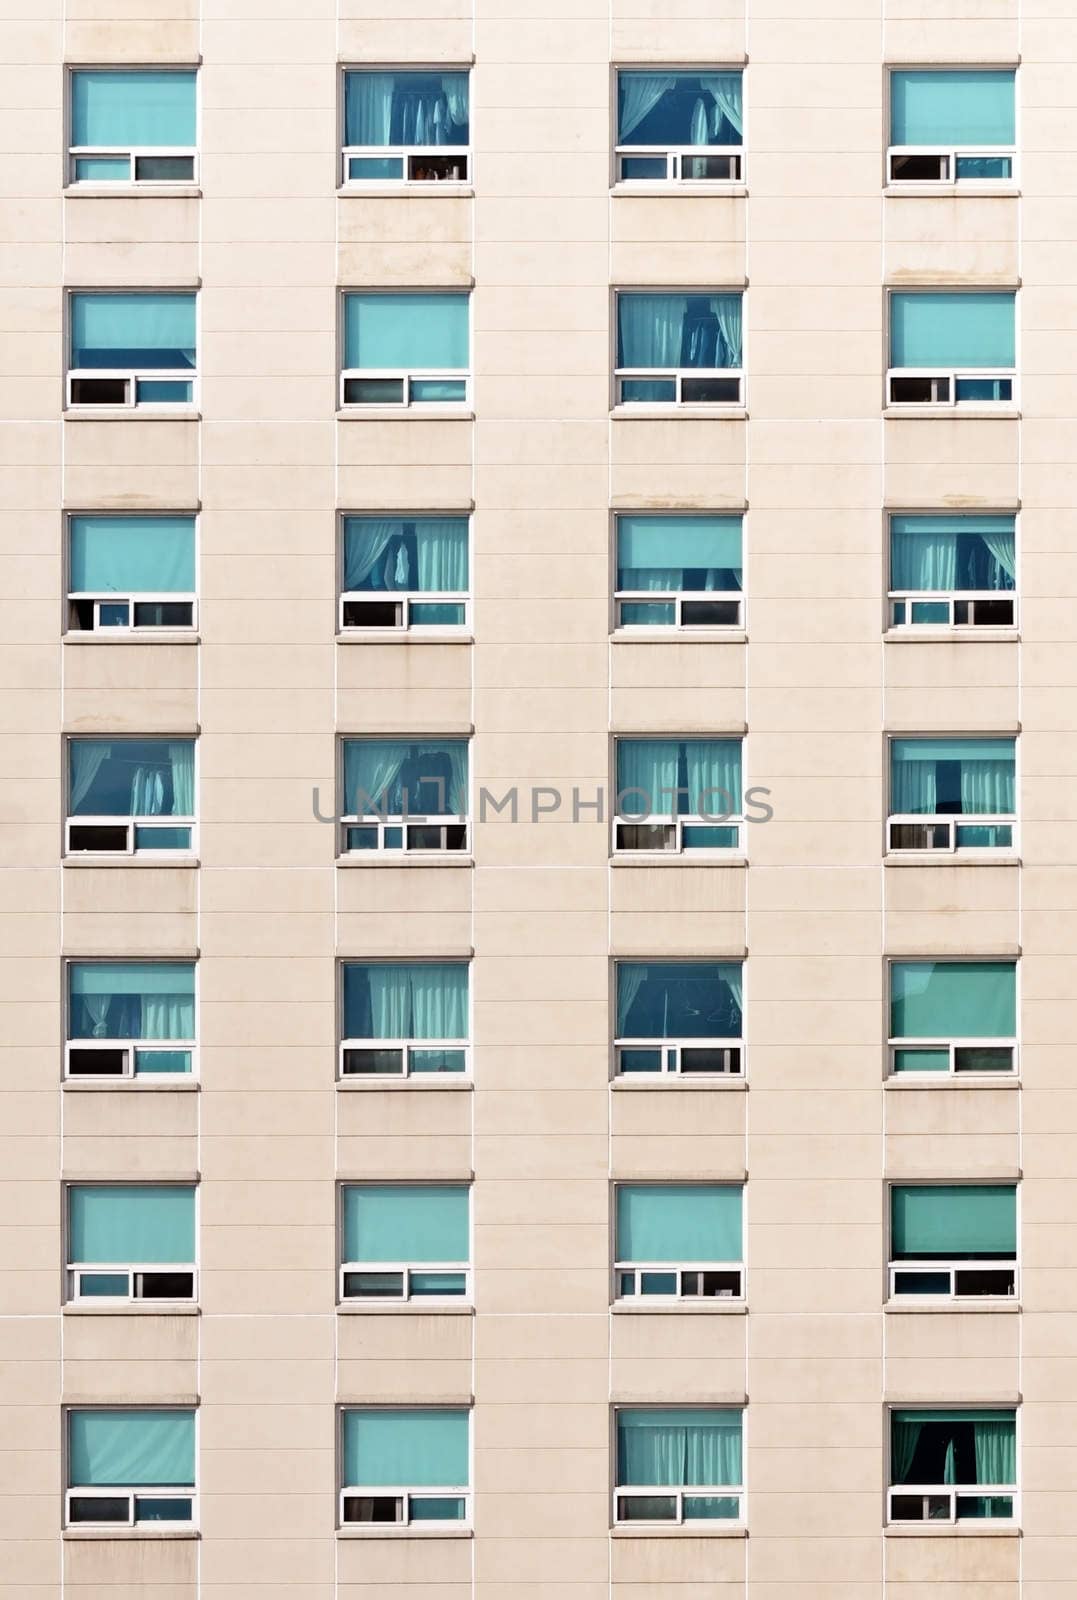 Dormitory wall with windows by dsmsoft